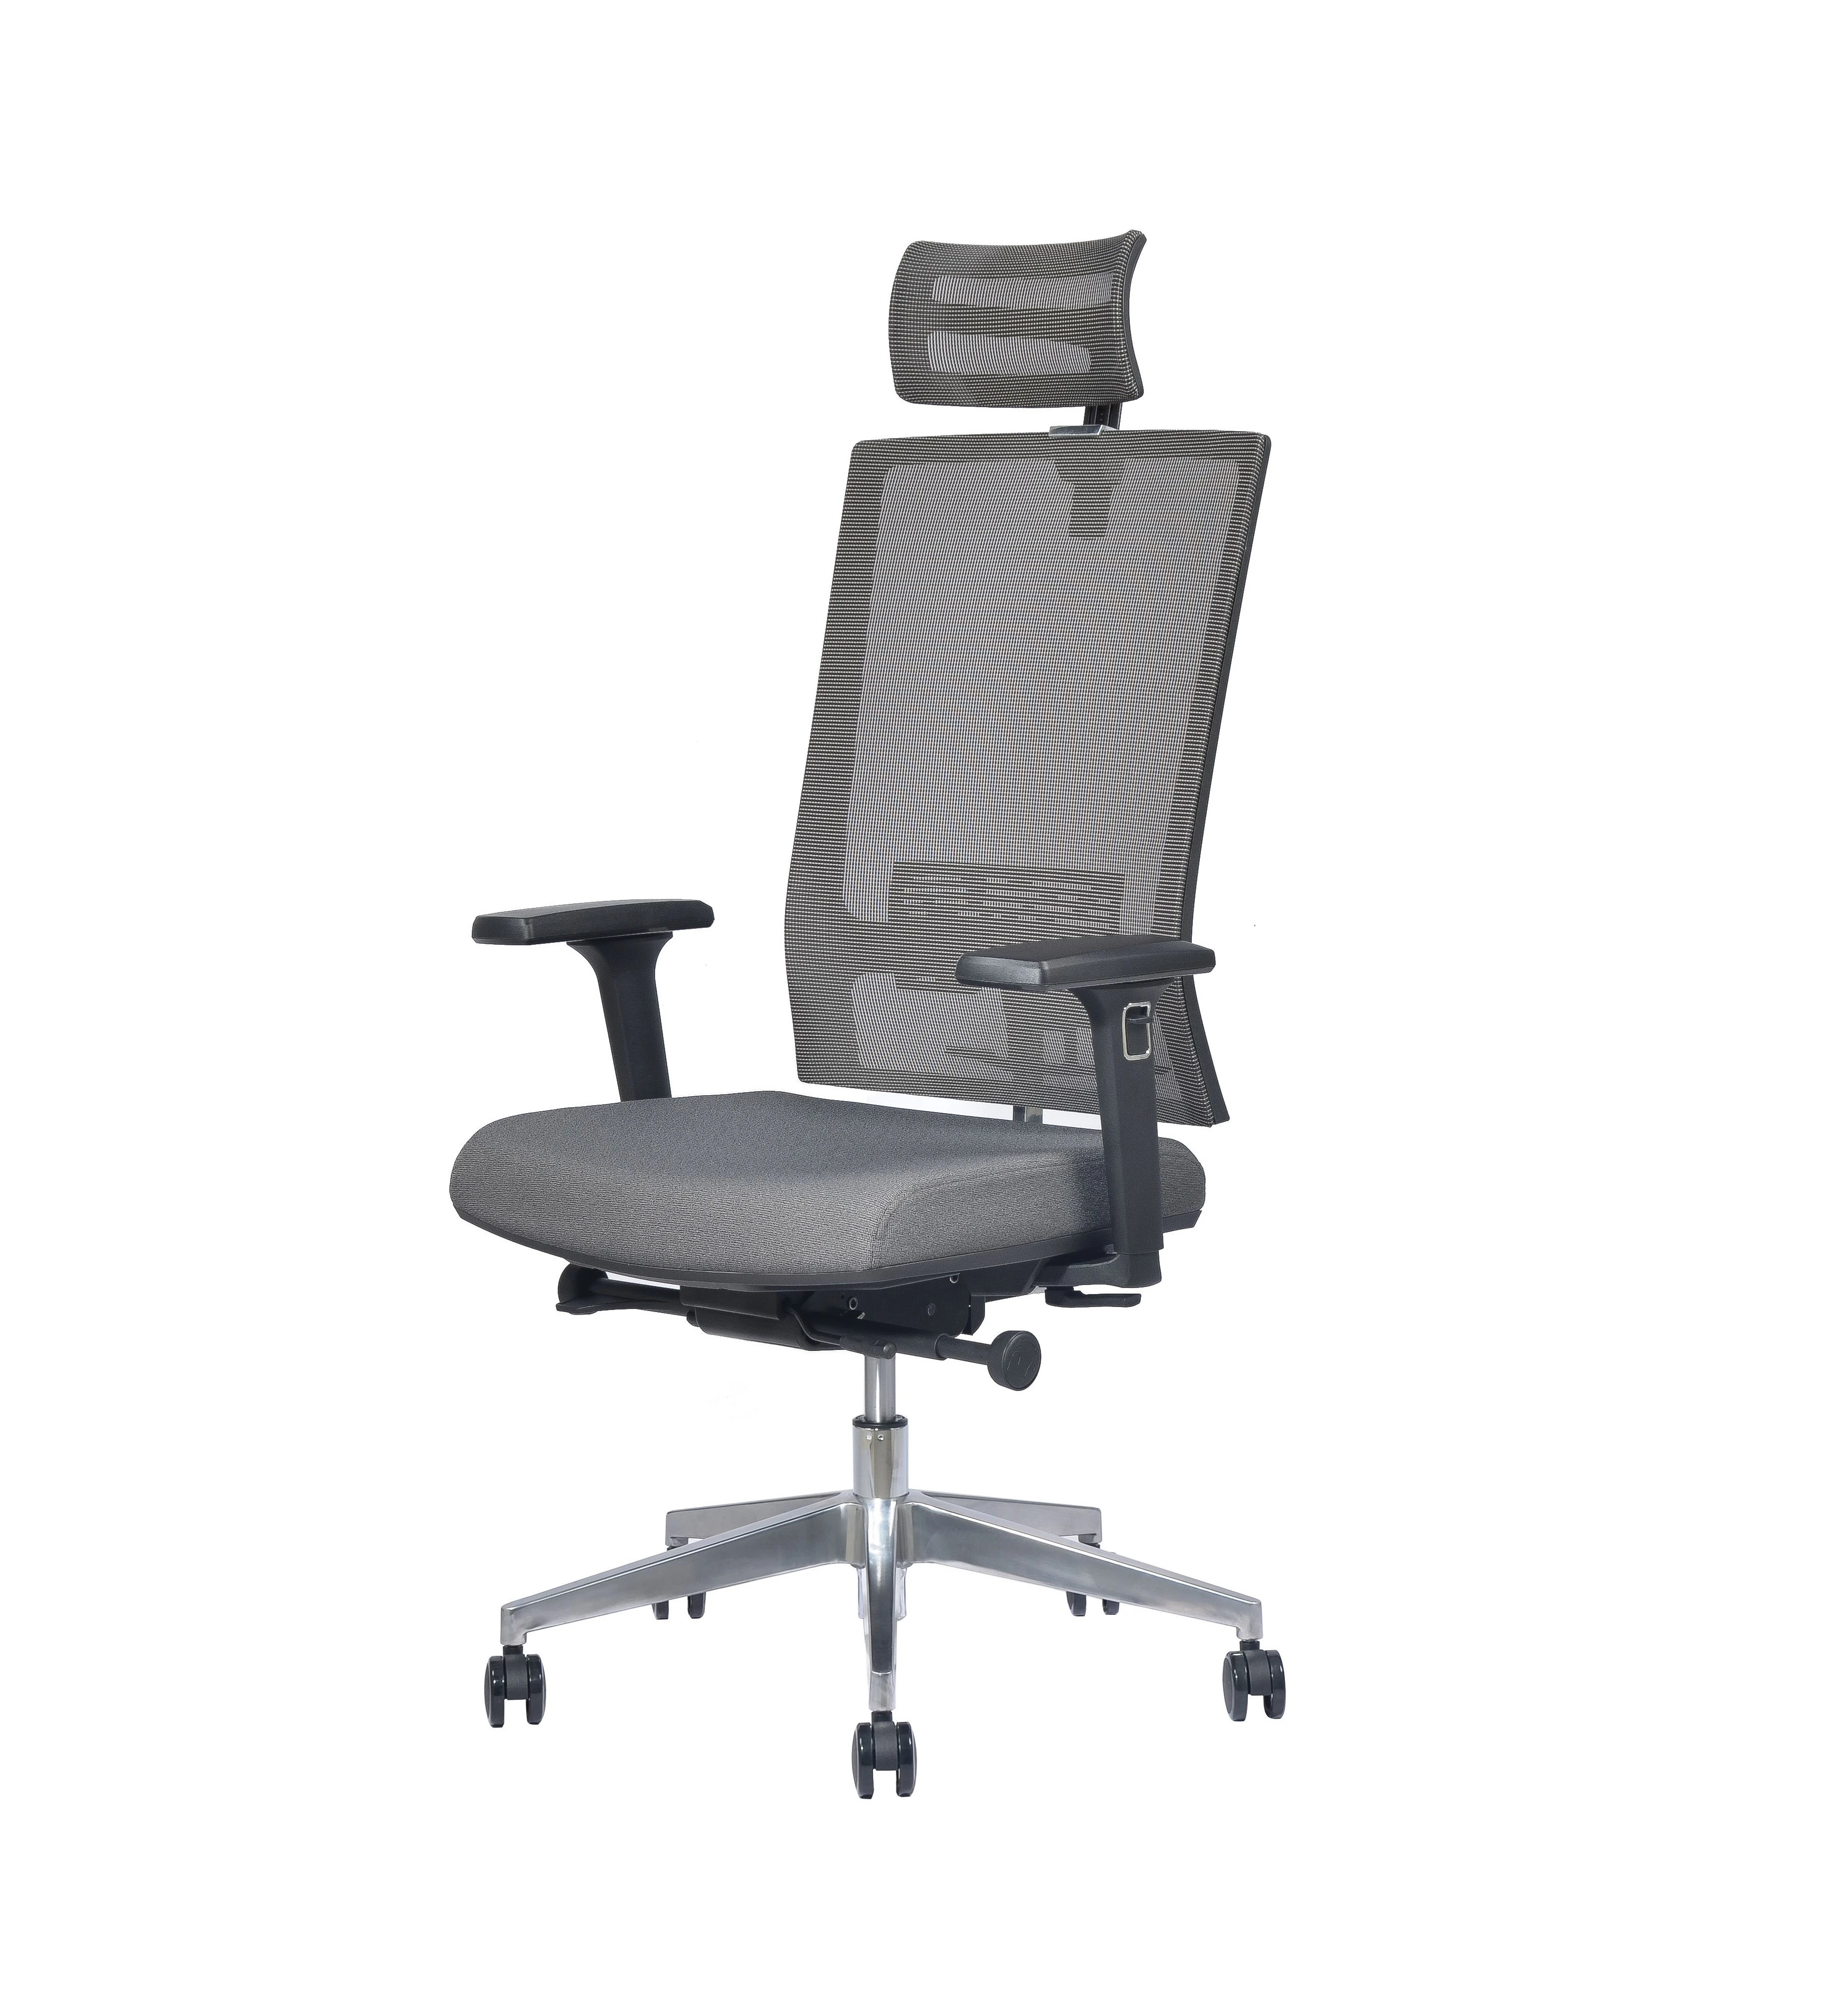 Modern multi-functional synchro mechanism executive office chair